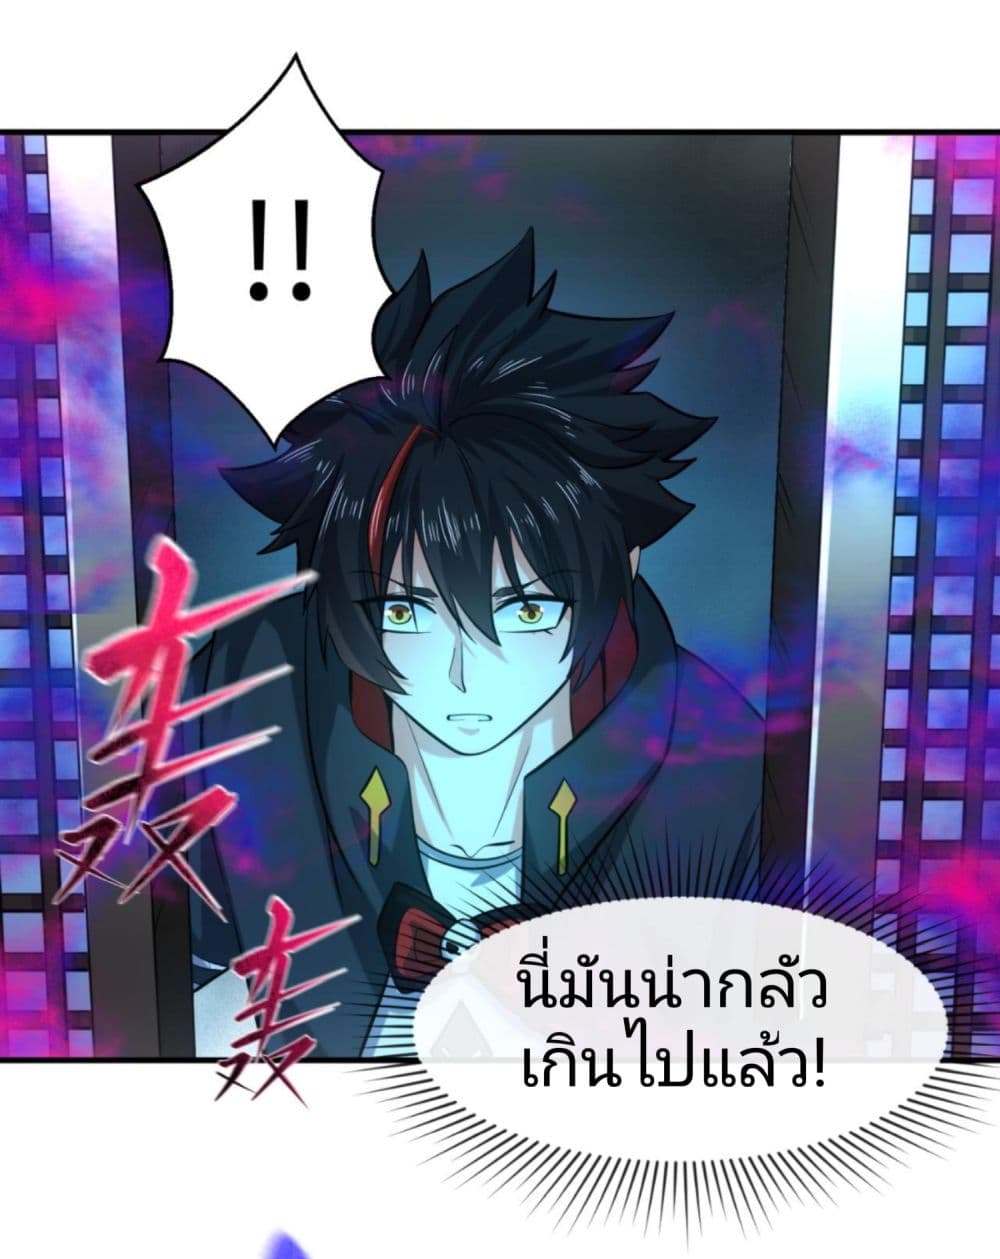 The Age of Ghost Spirits à¸à¸­à¸à¸à¸µà¹ 47 (28)